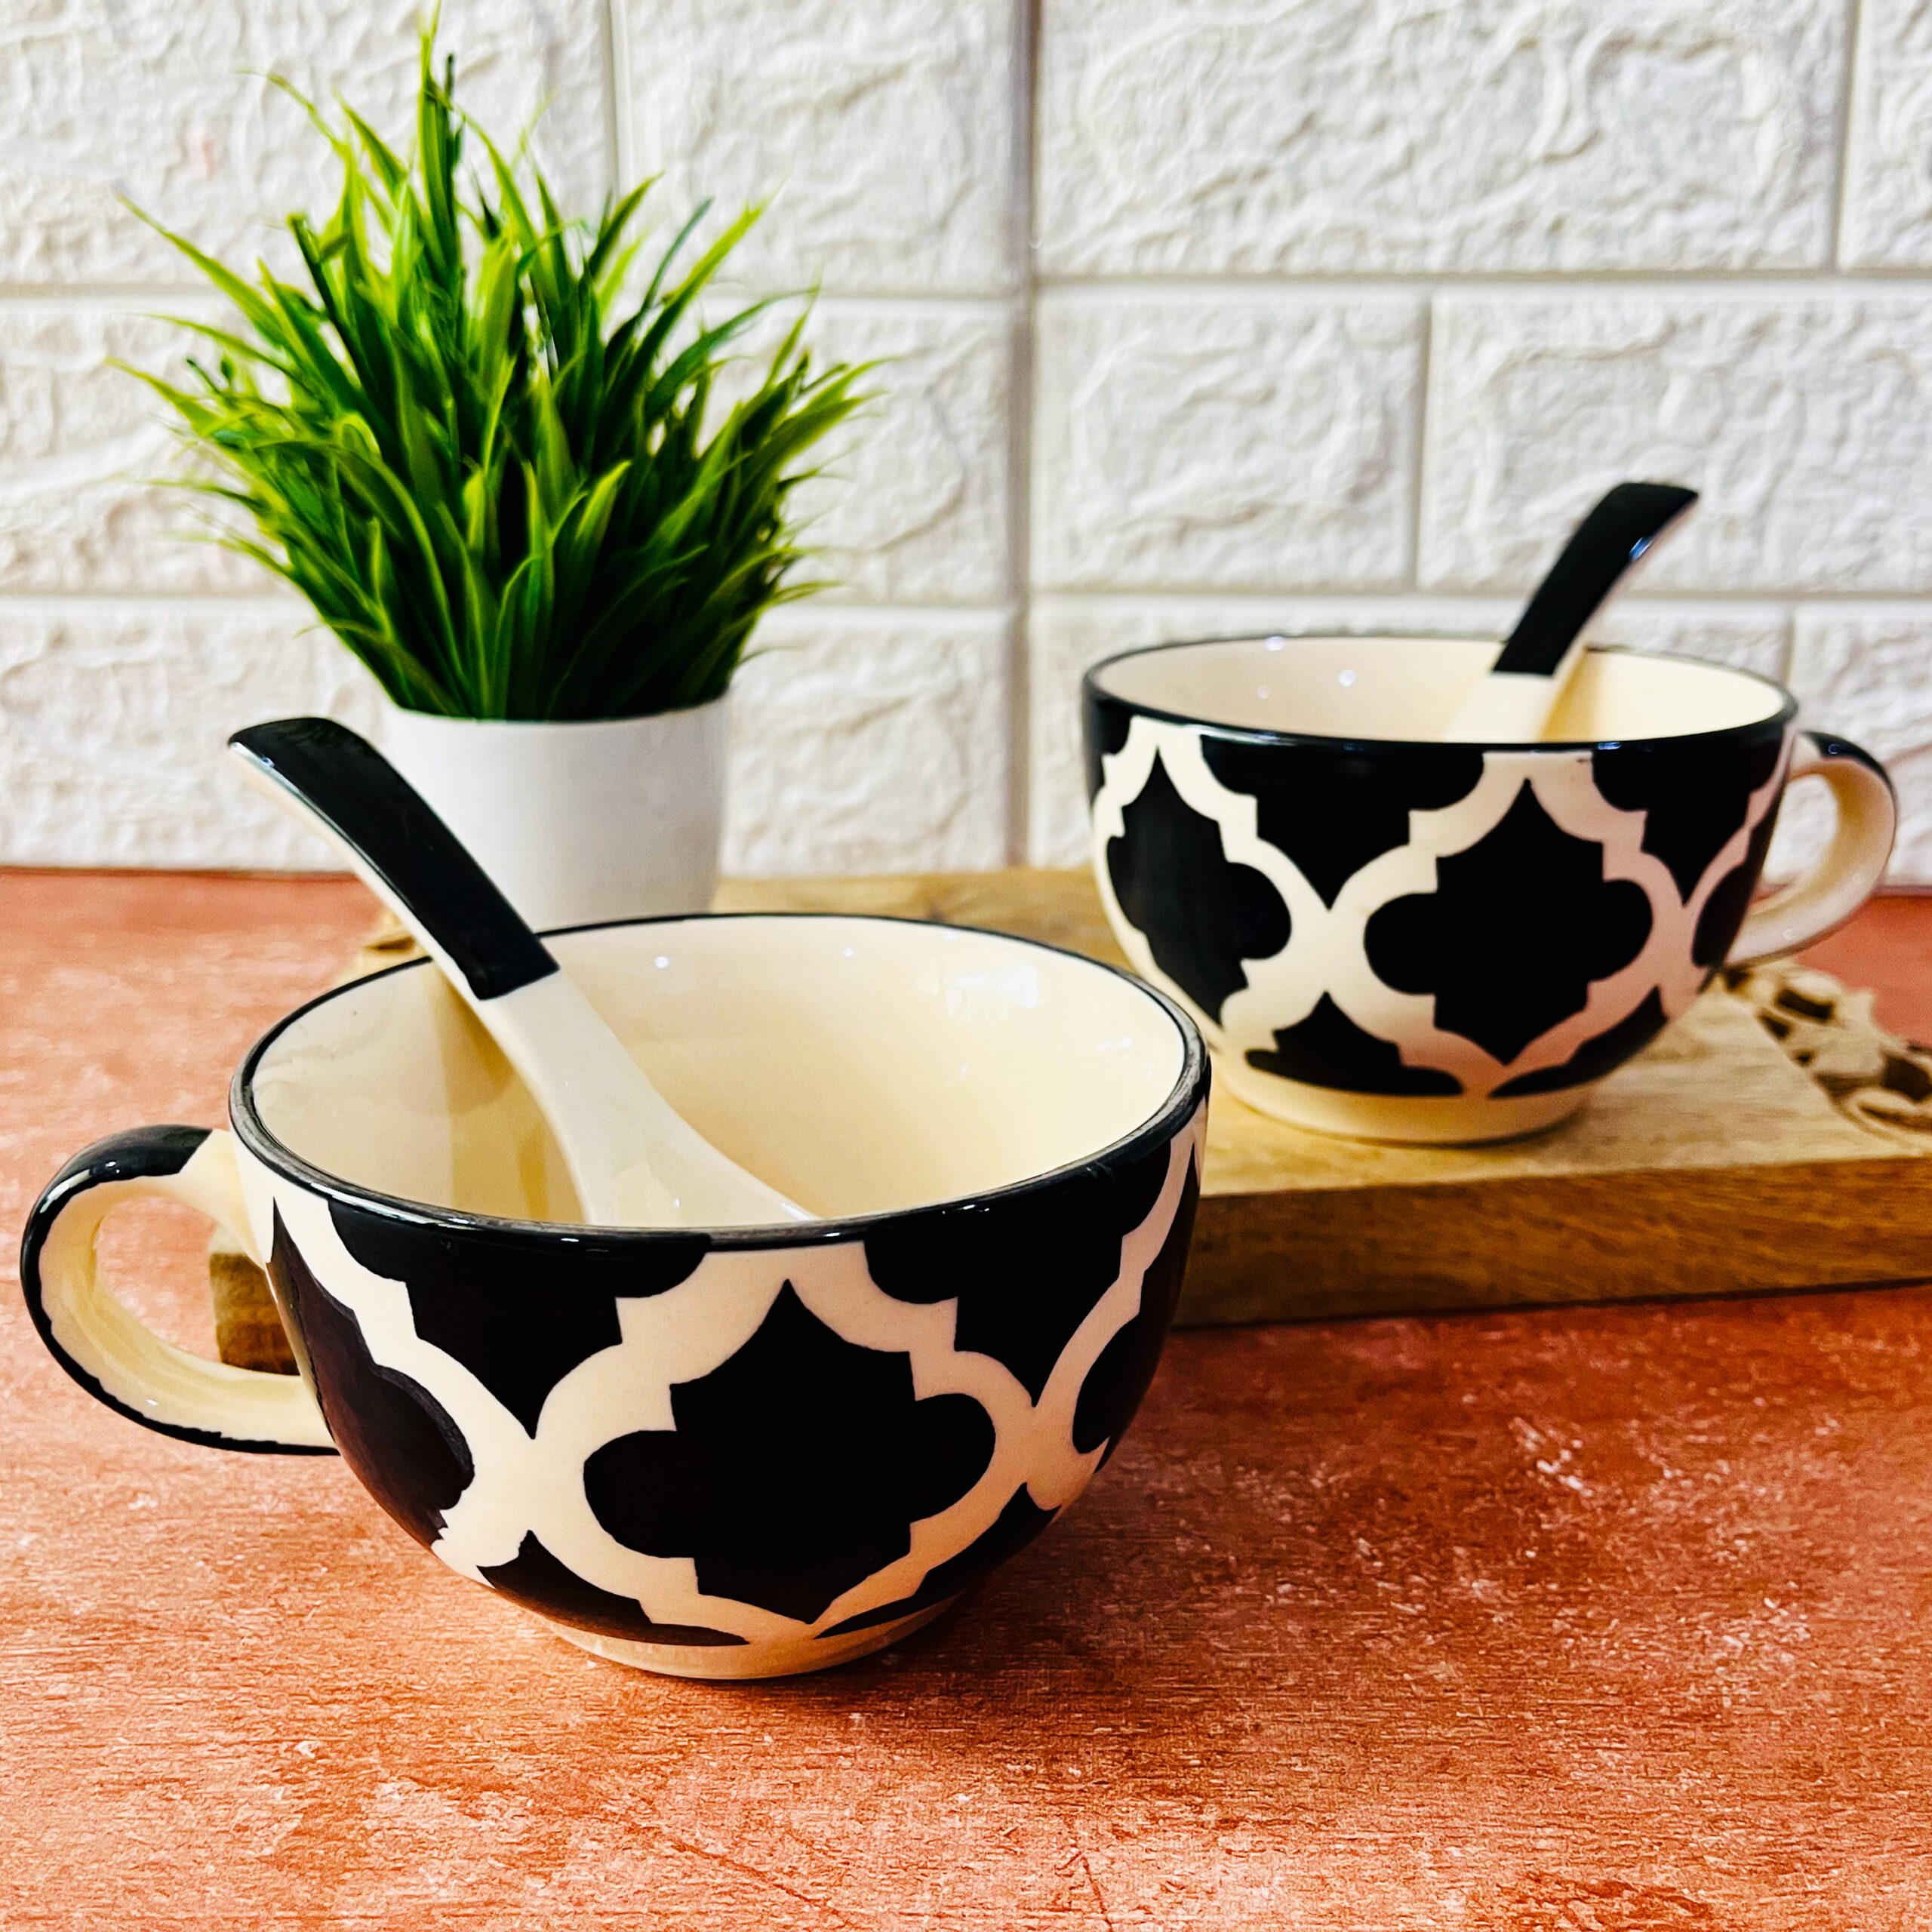 Black Moroccan ceramic Soup bowls with spoons set of 2 - The Artisan Emporium